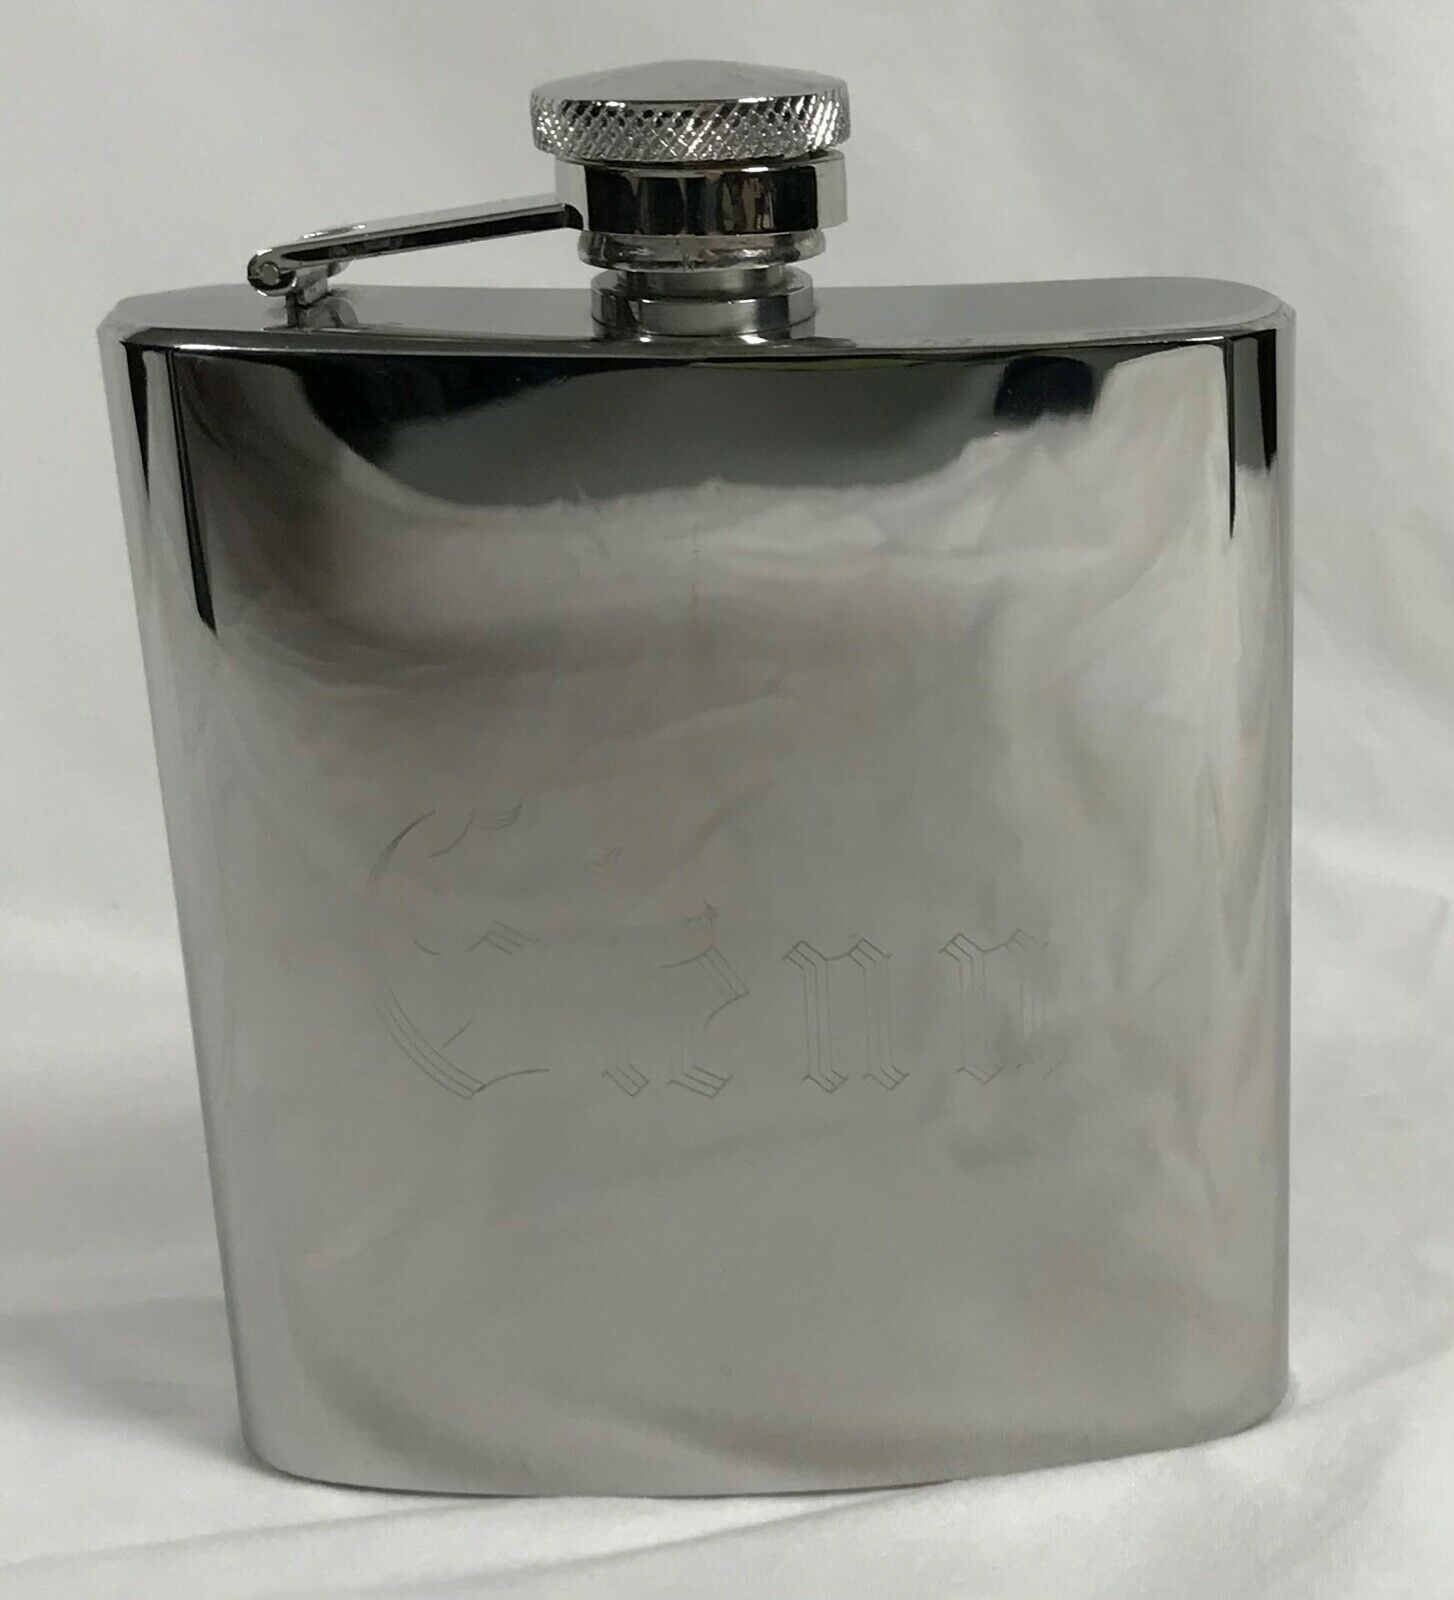 Chrome Stainless Steel Hip Flask 7 Ounces with the name “Glenn” Engraved  - $14.95